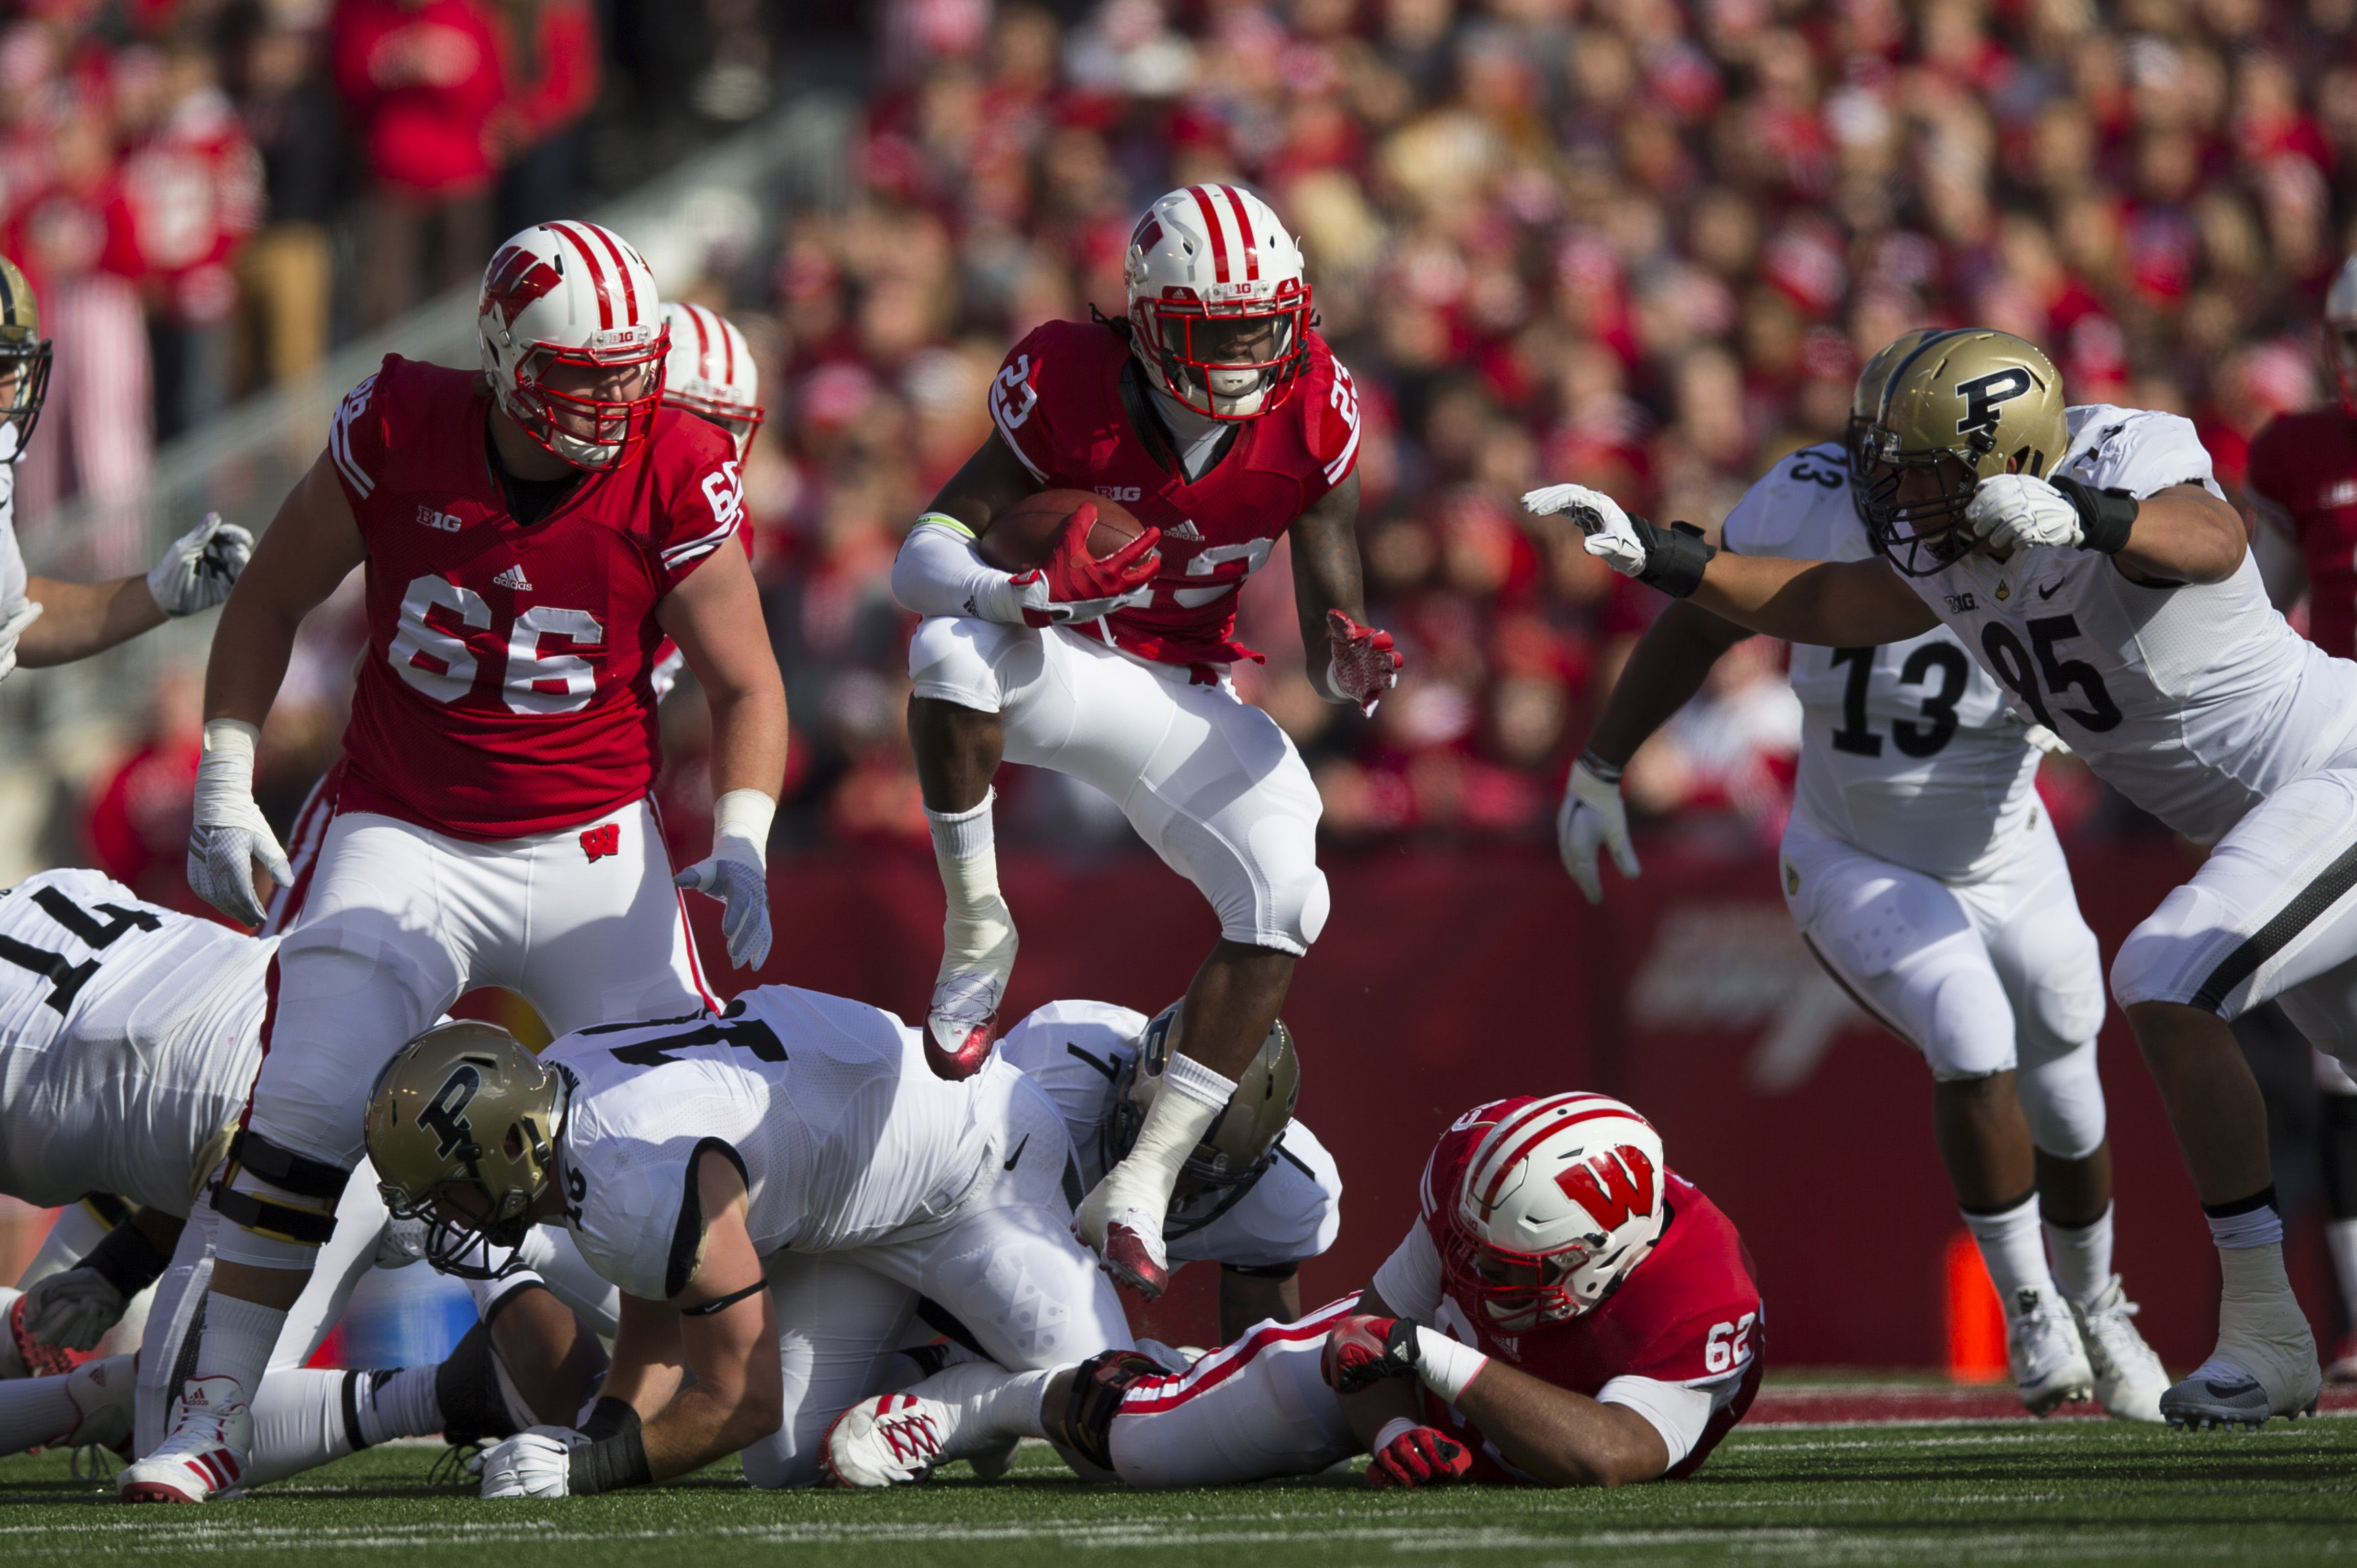 Dare Ogunbowale leaping over the pile in Wisconsin's win over Purdue on Saturday.